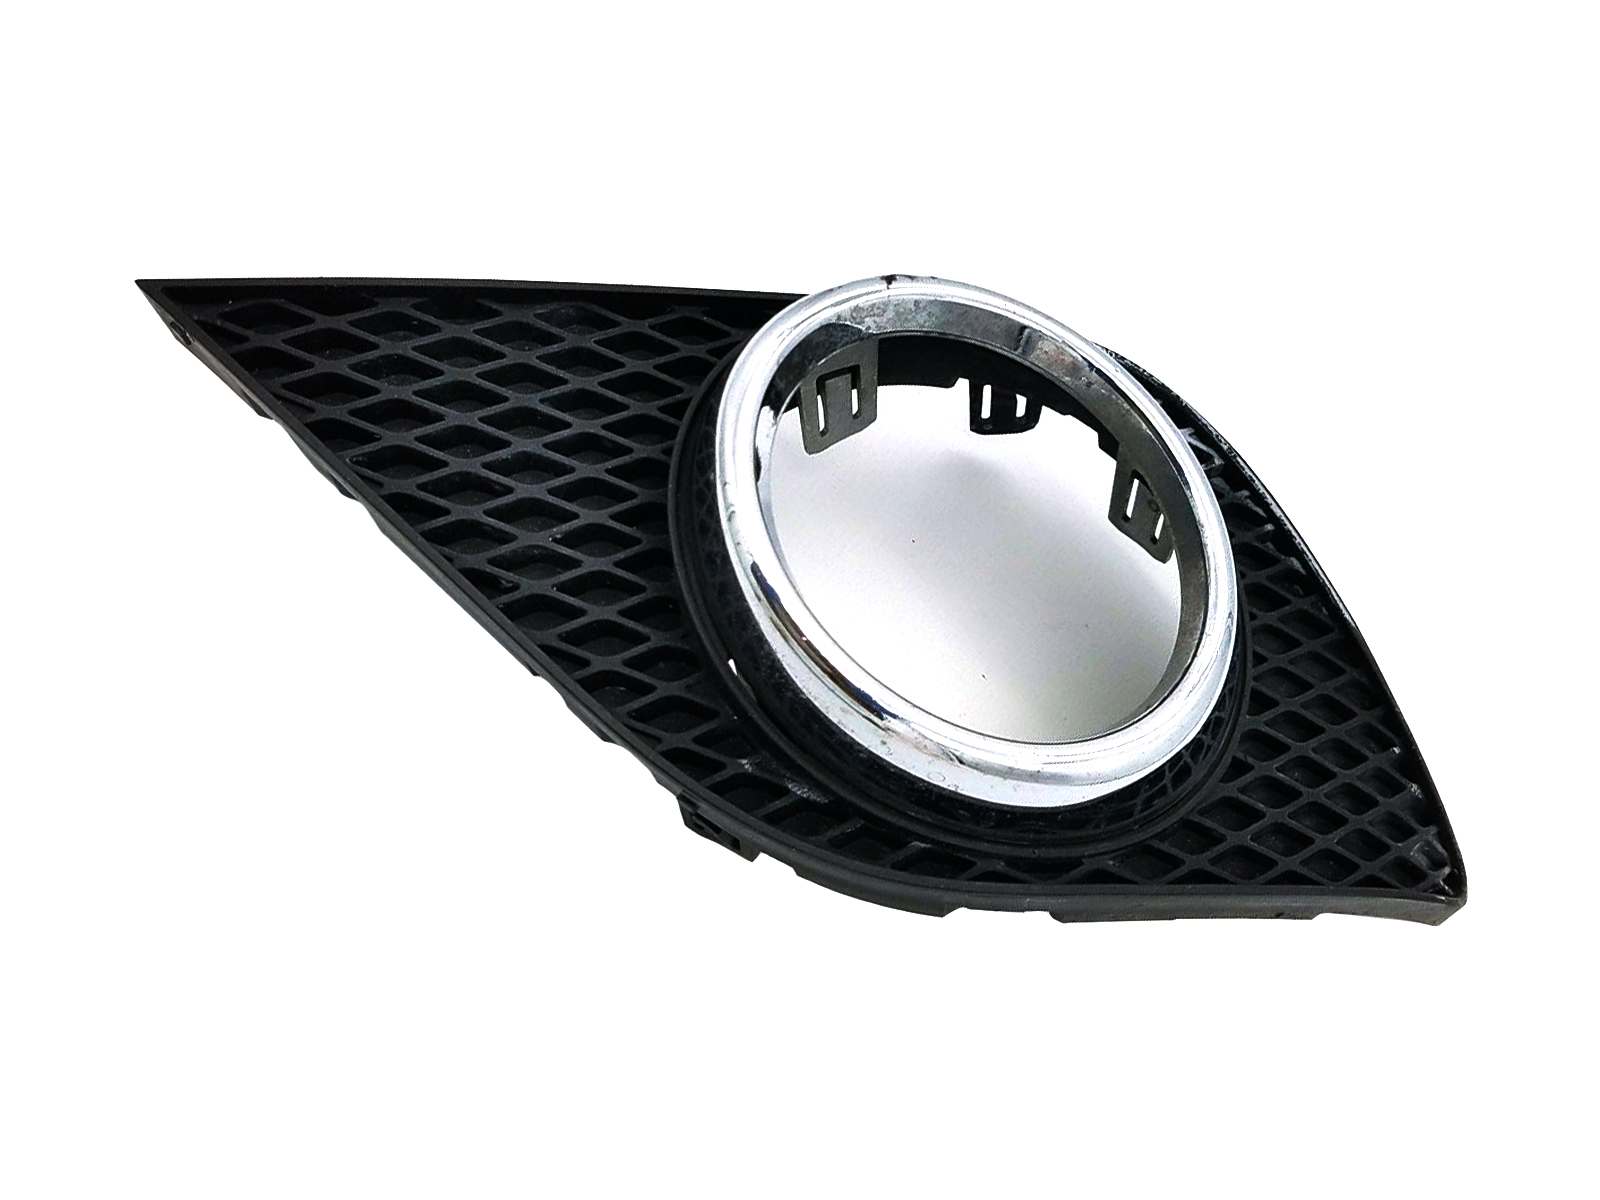 OEM Infiniti G37 Q60 Coupe Fog Light Housing Bumper Finisher LH Z1  Motorsports Performance OEM and Aftermarket Engineered Parts Global  Leader In 300ZX 350Z 370Z G35 G37 Q50 Q60